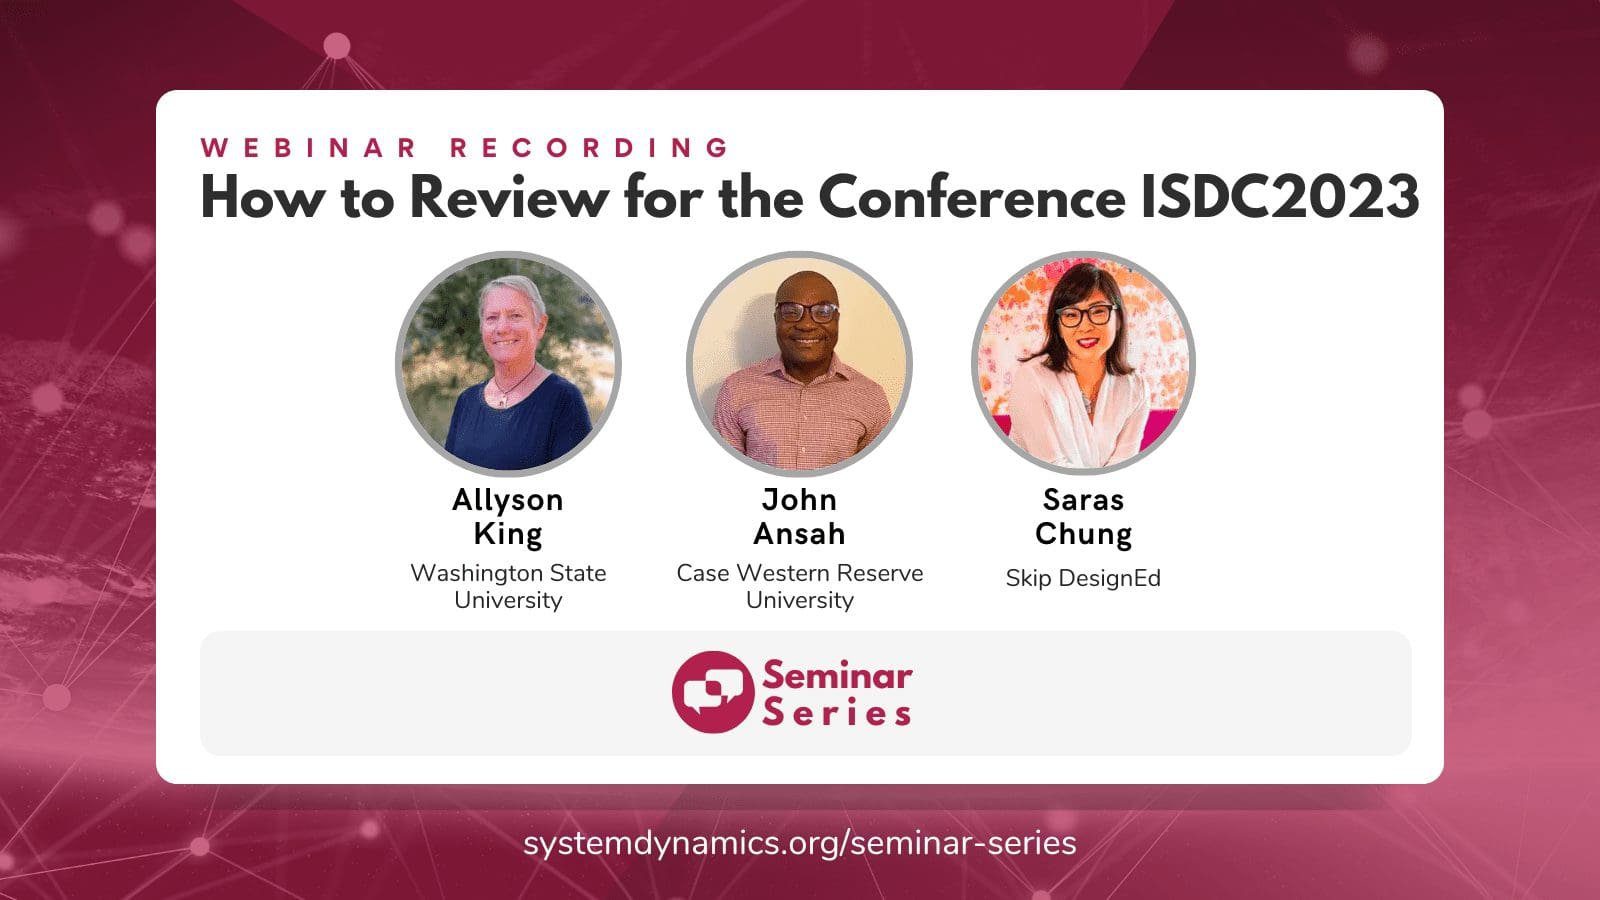 How To Review for ISDC 2023